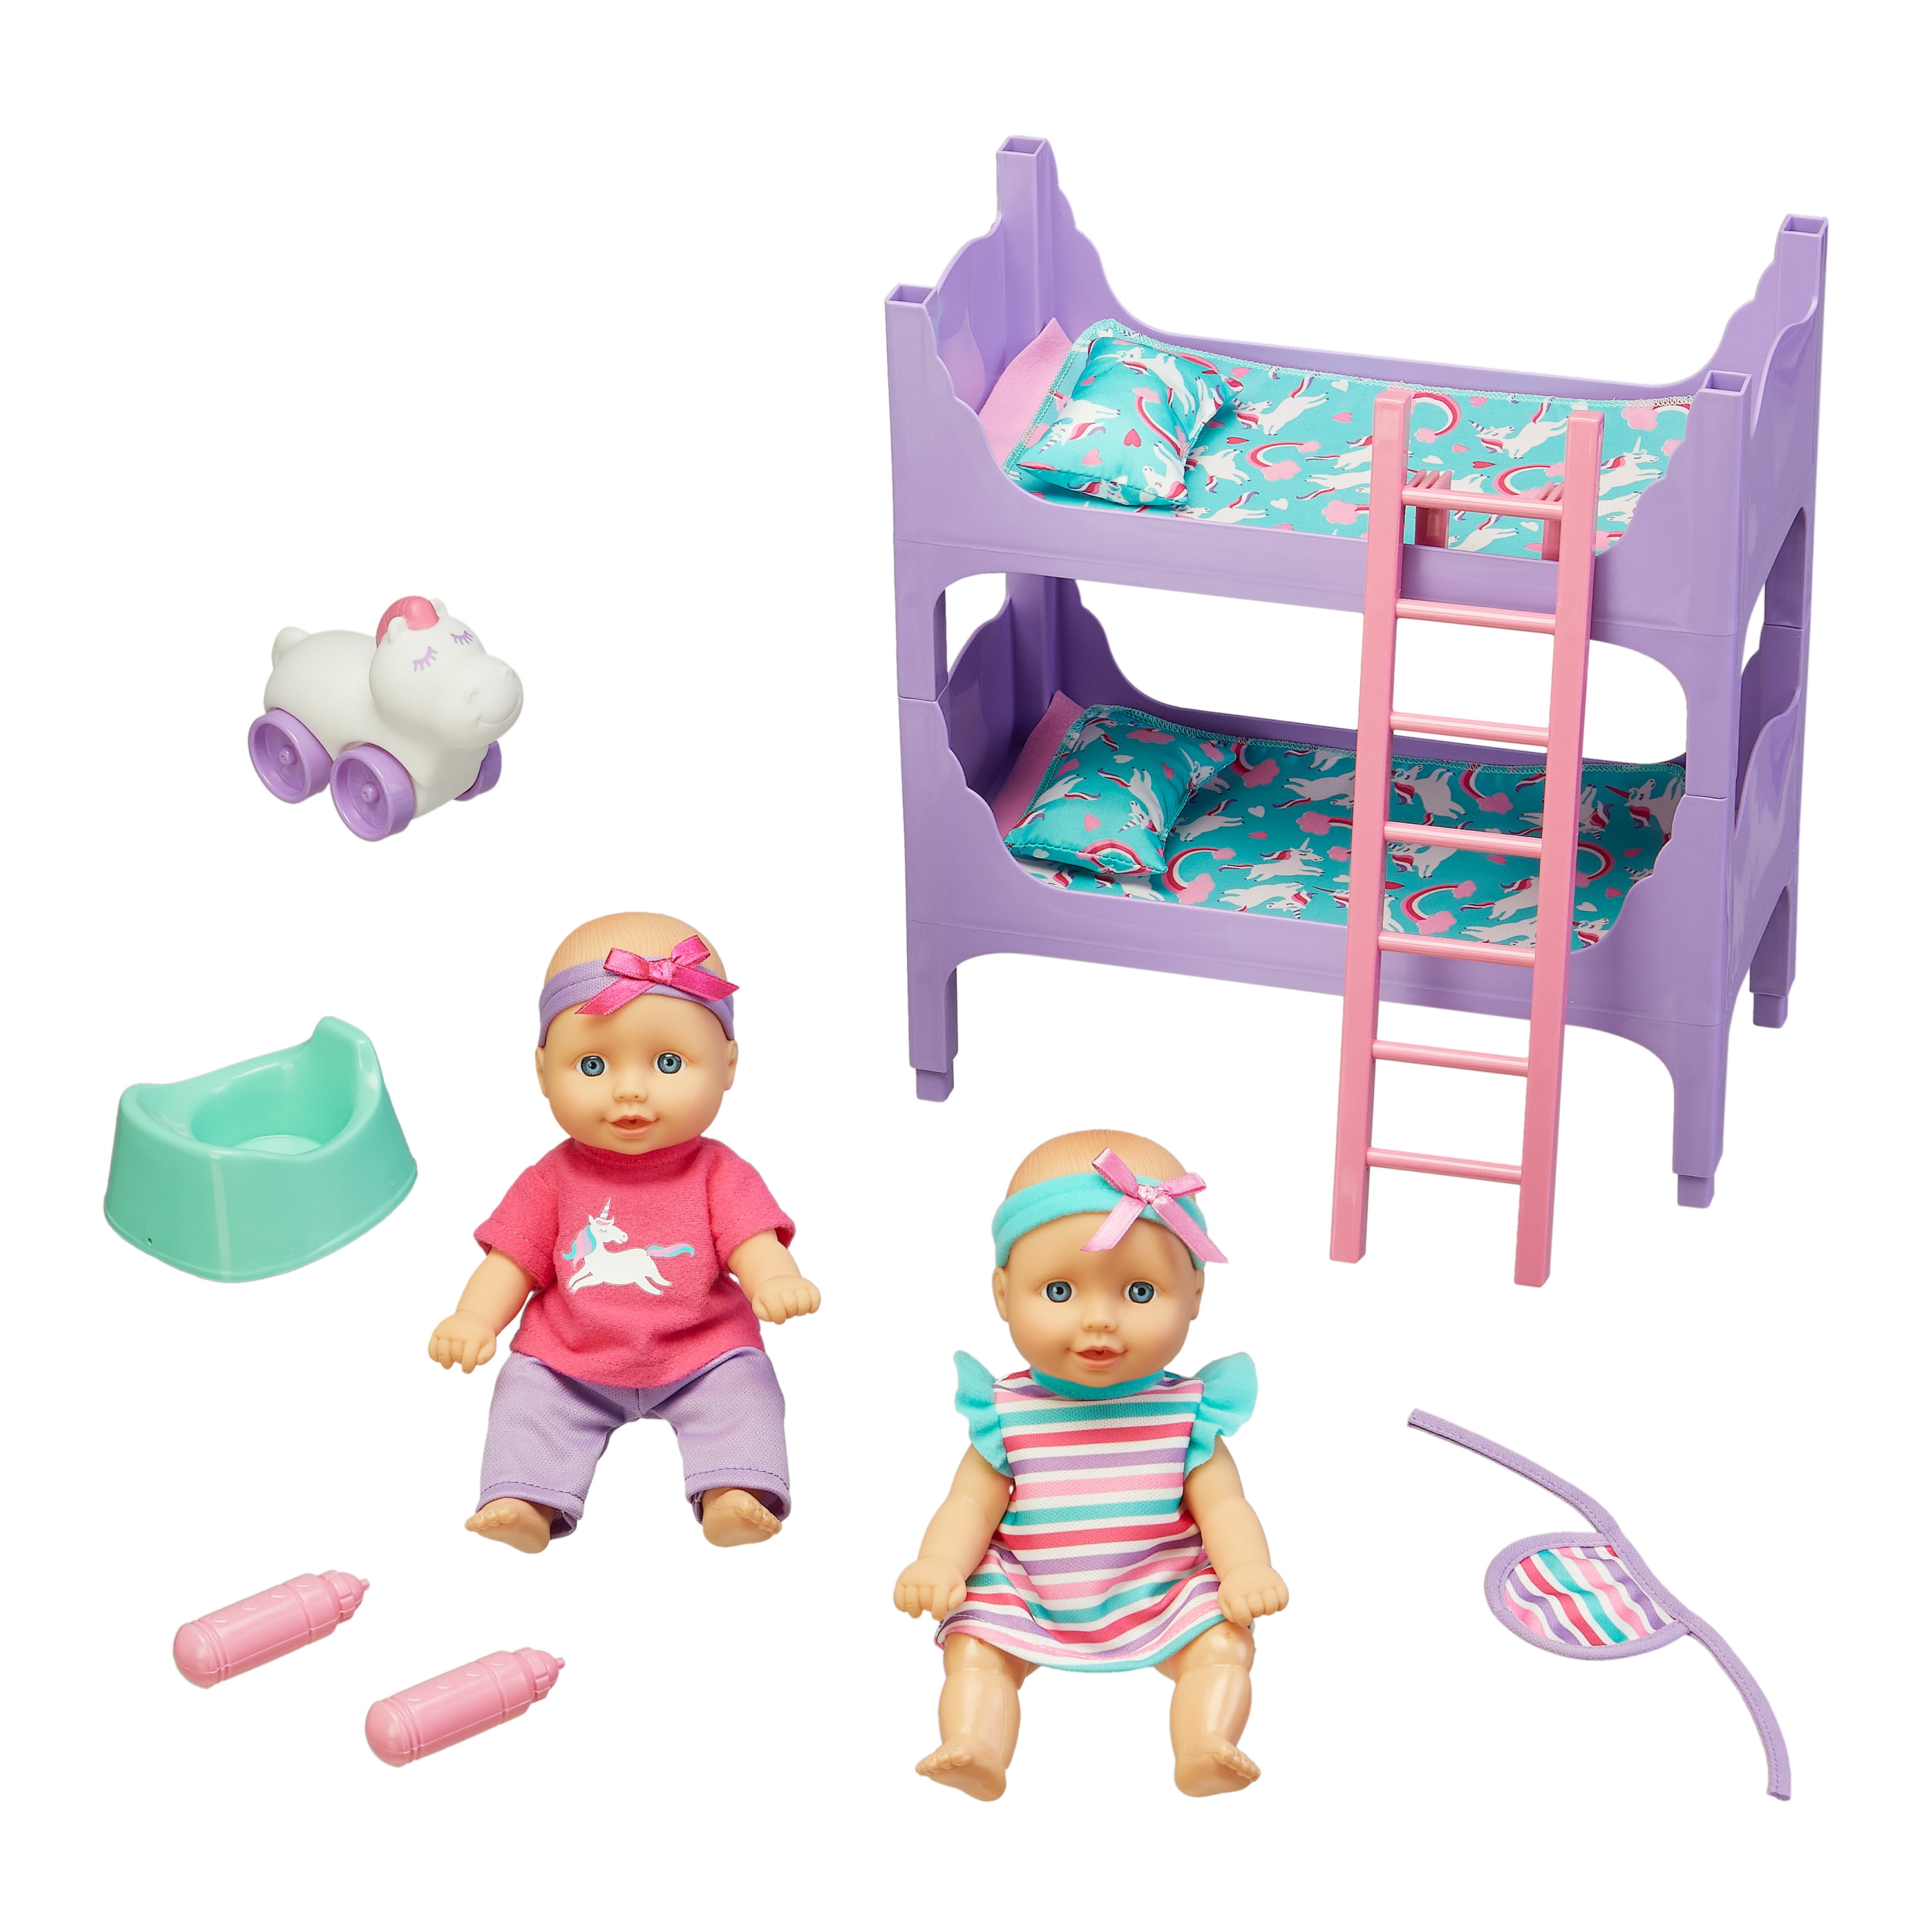 kid connection baby doll set